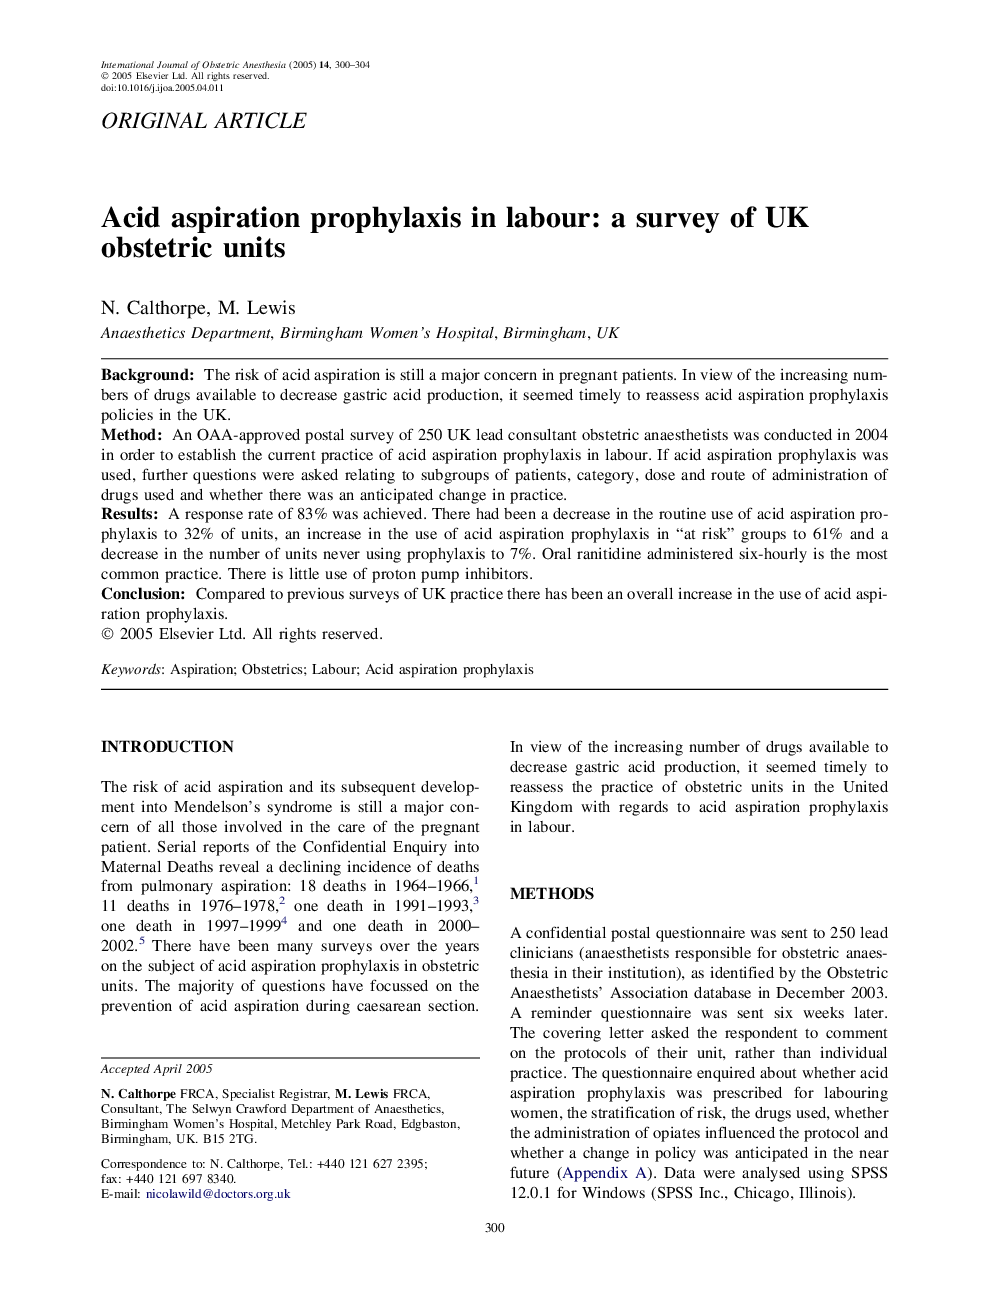 Acid aspiration prophylaxis in labour: a survey of UK obstetric units